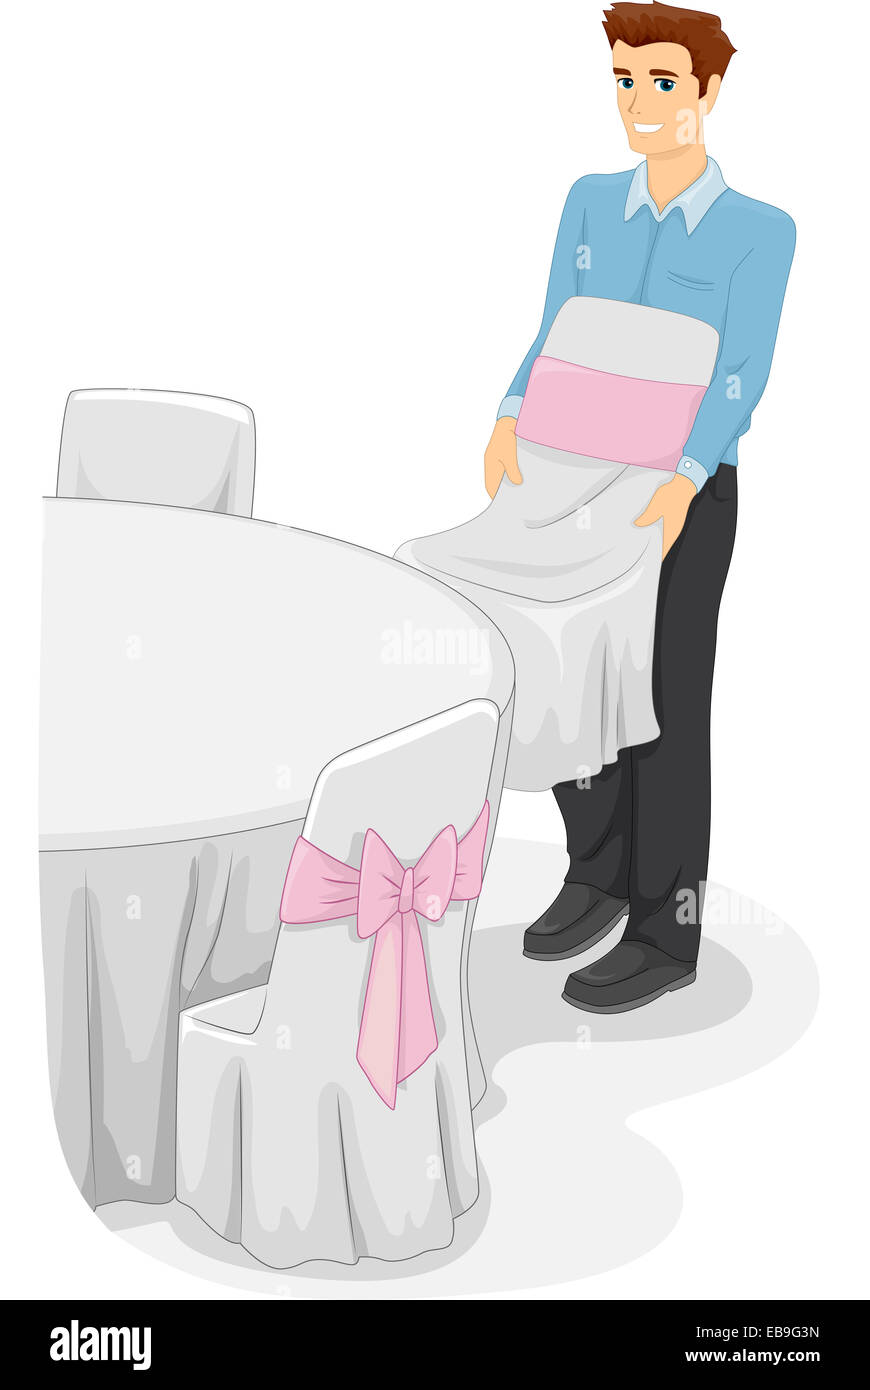 Illustration of a Man Arranging Tables and Chairs for an Event Stock Photo  - Alamy